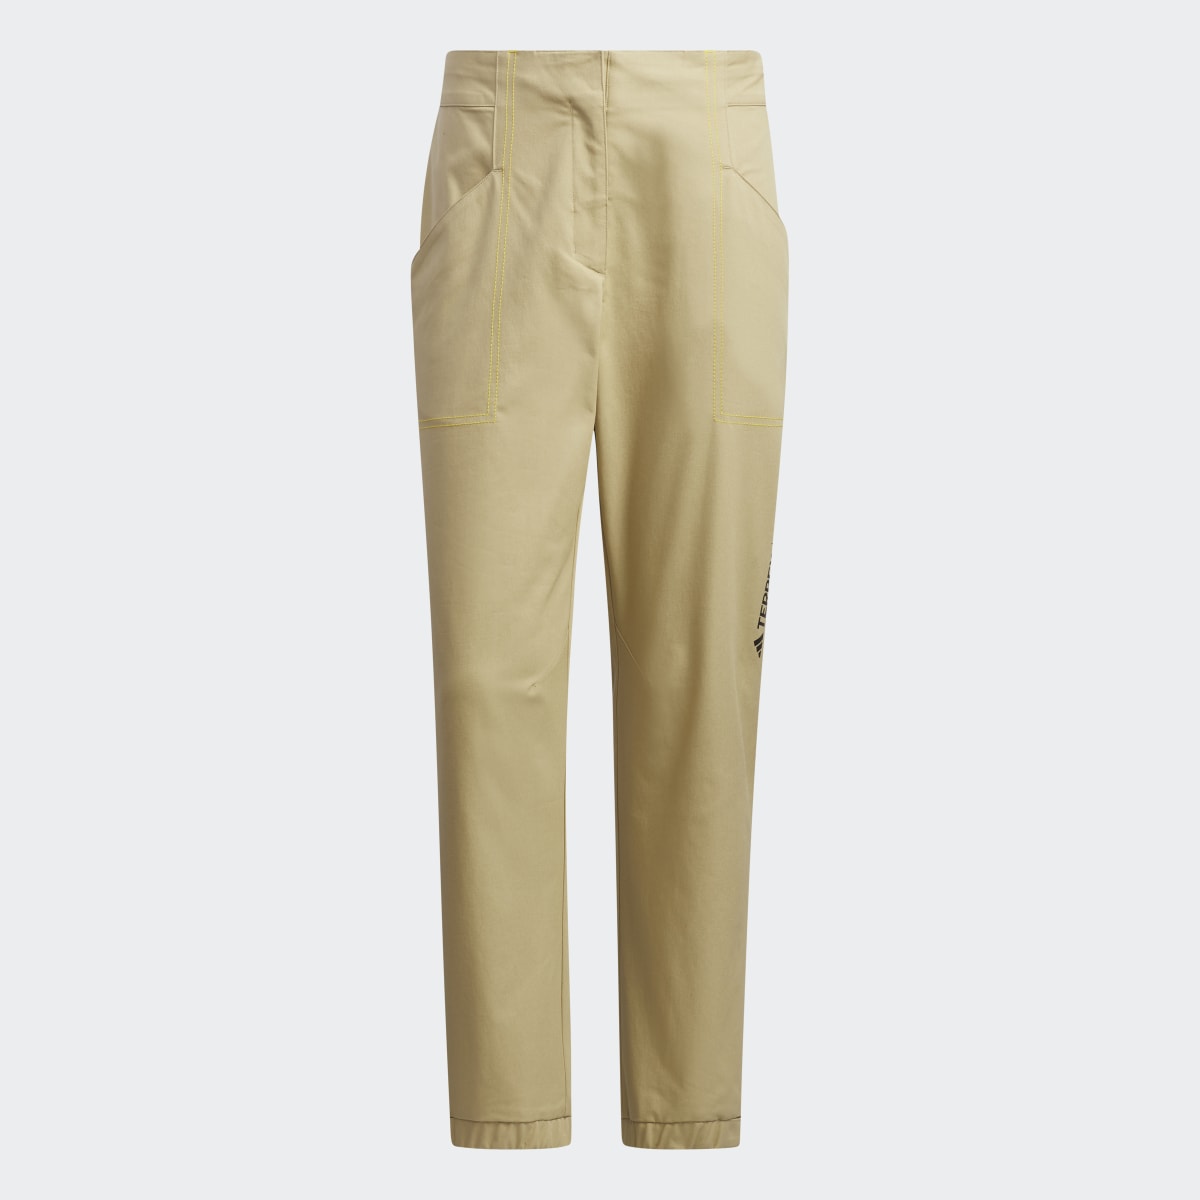 Adidas National Geographic Twill Trousers. 4